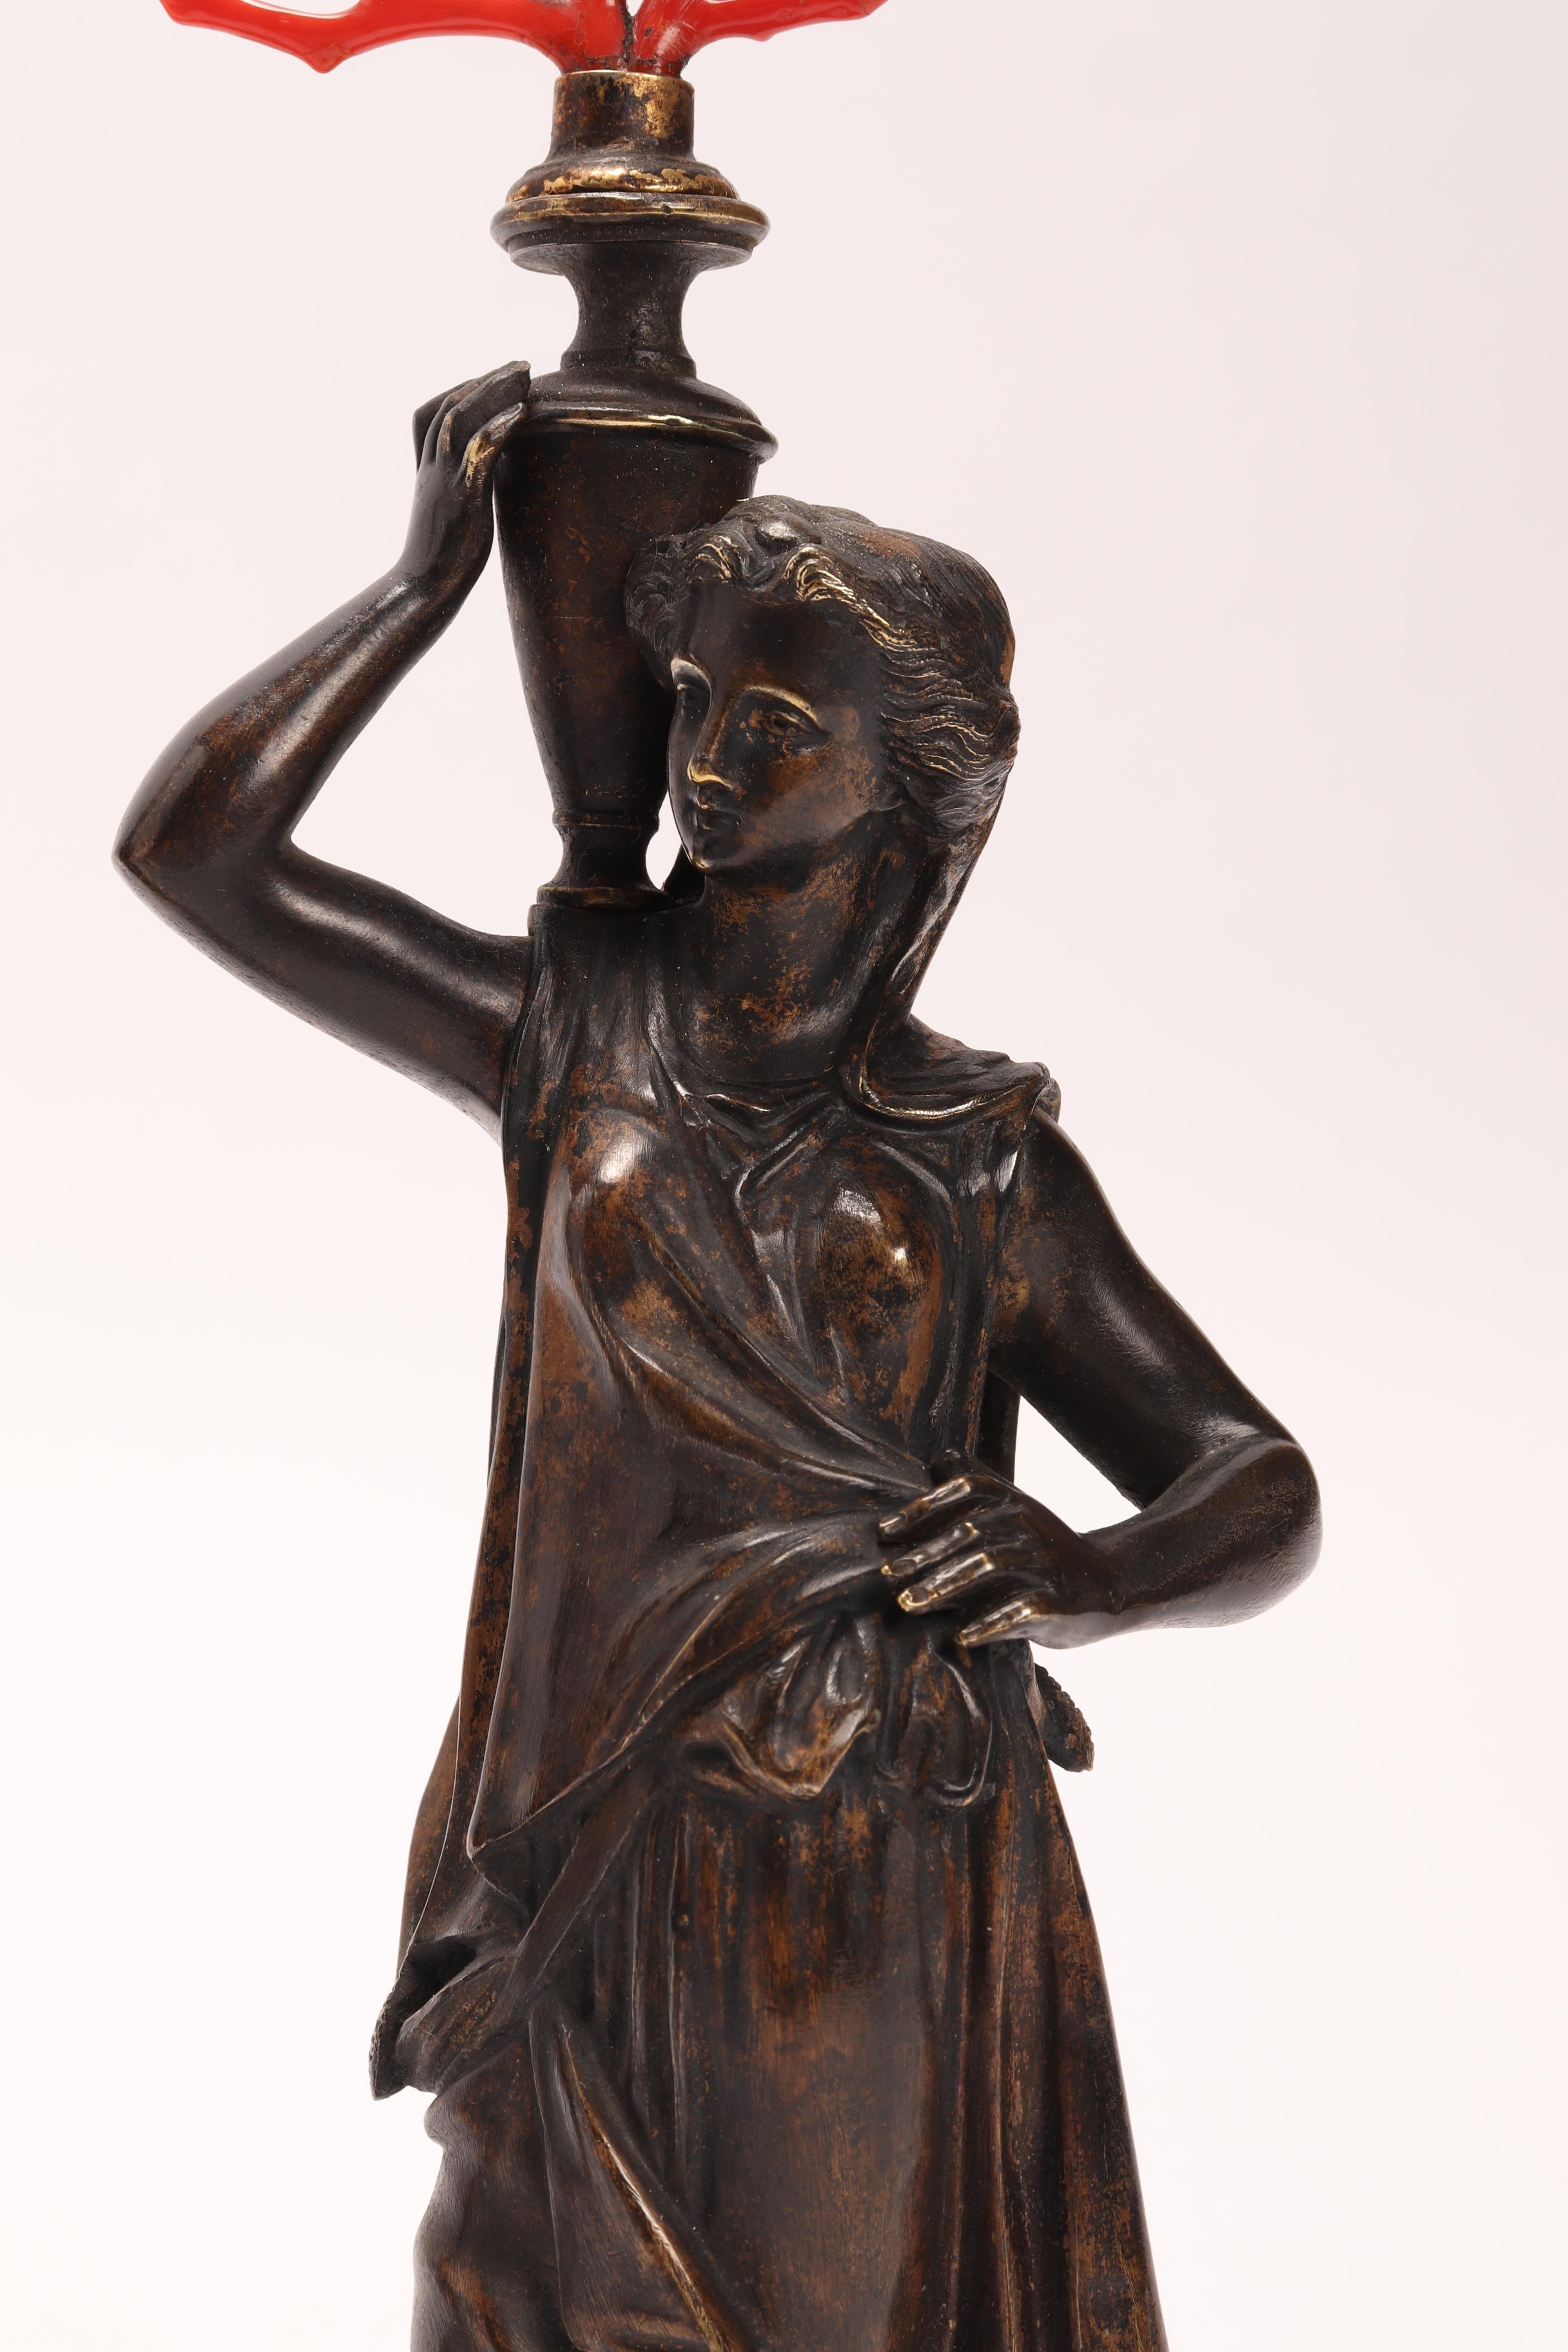 A pair of neoclassical bronze sculptures depicting a woman holding a vase with red Mediterranean coral branches on her shoulder, Italy, circa 1850.